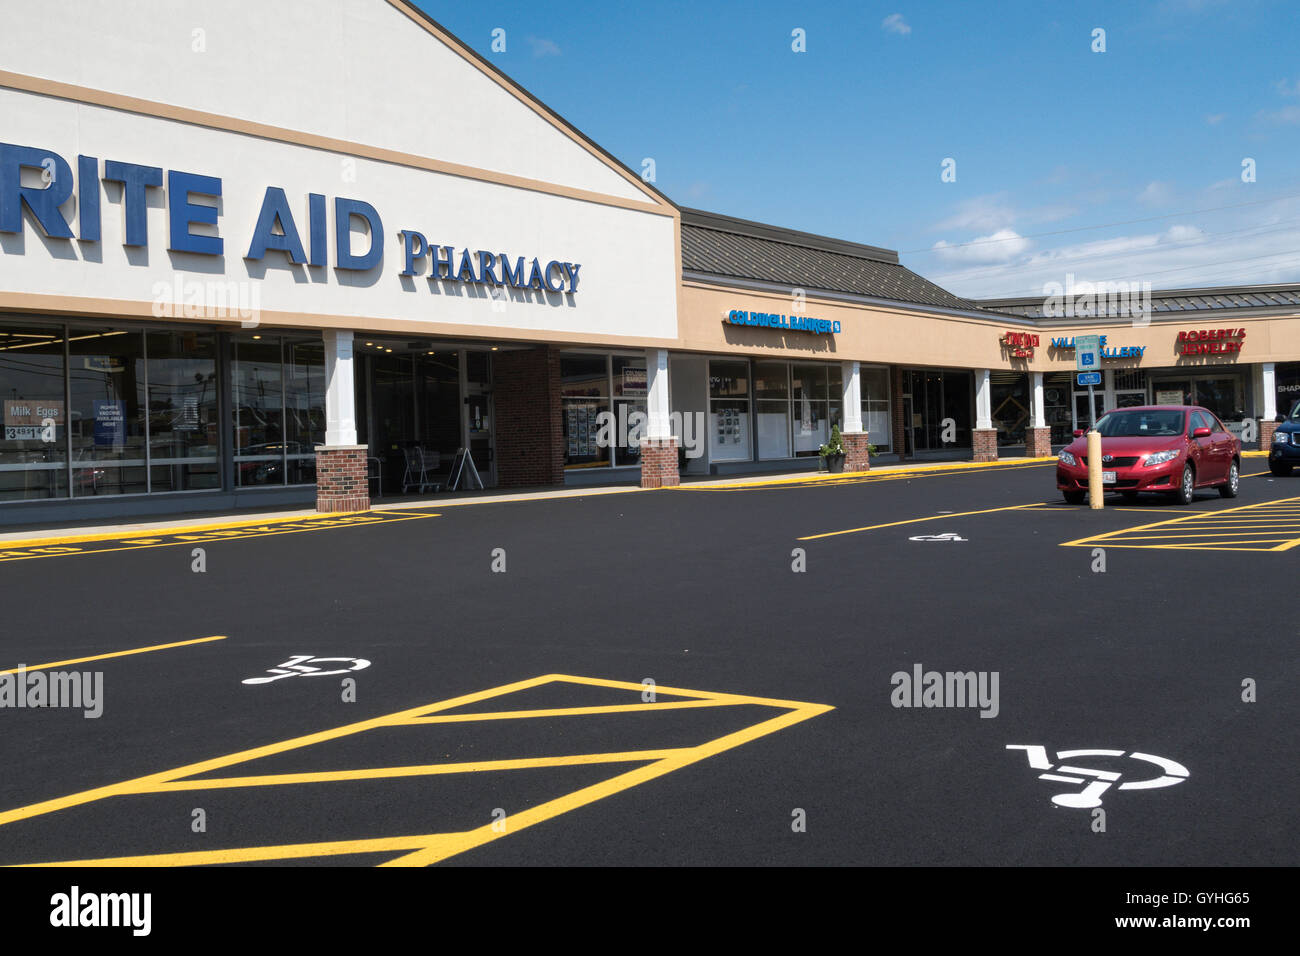 Shopping Center with Rite Aid Pharmacy, MA, USA Stock Photo